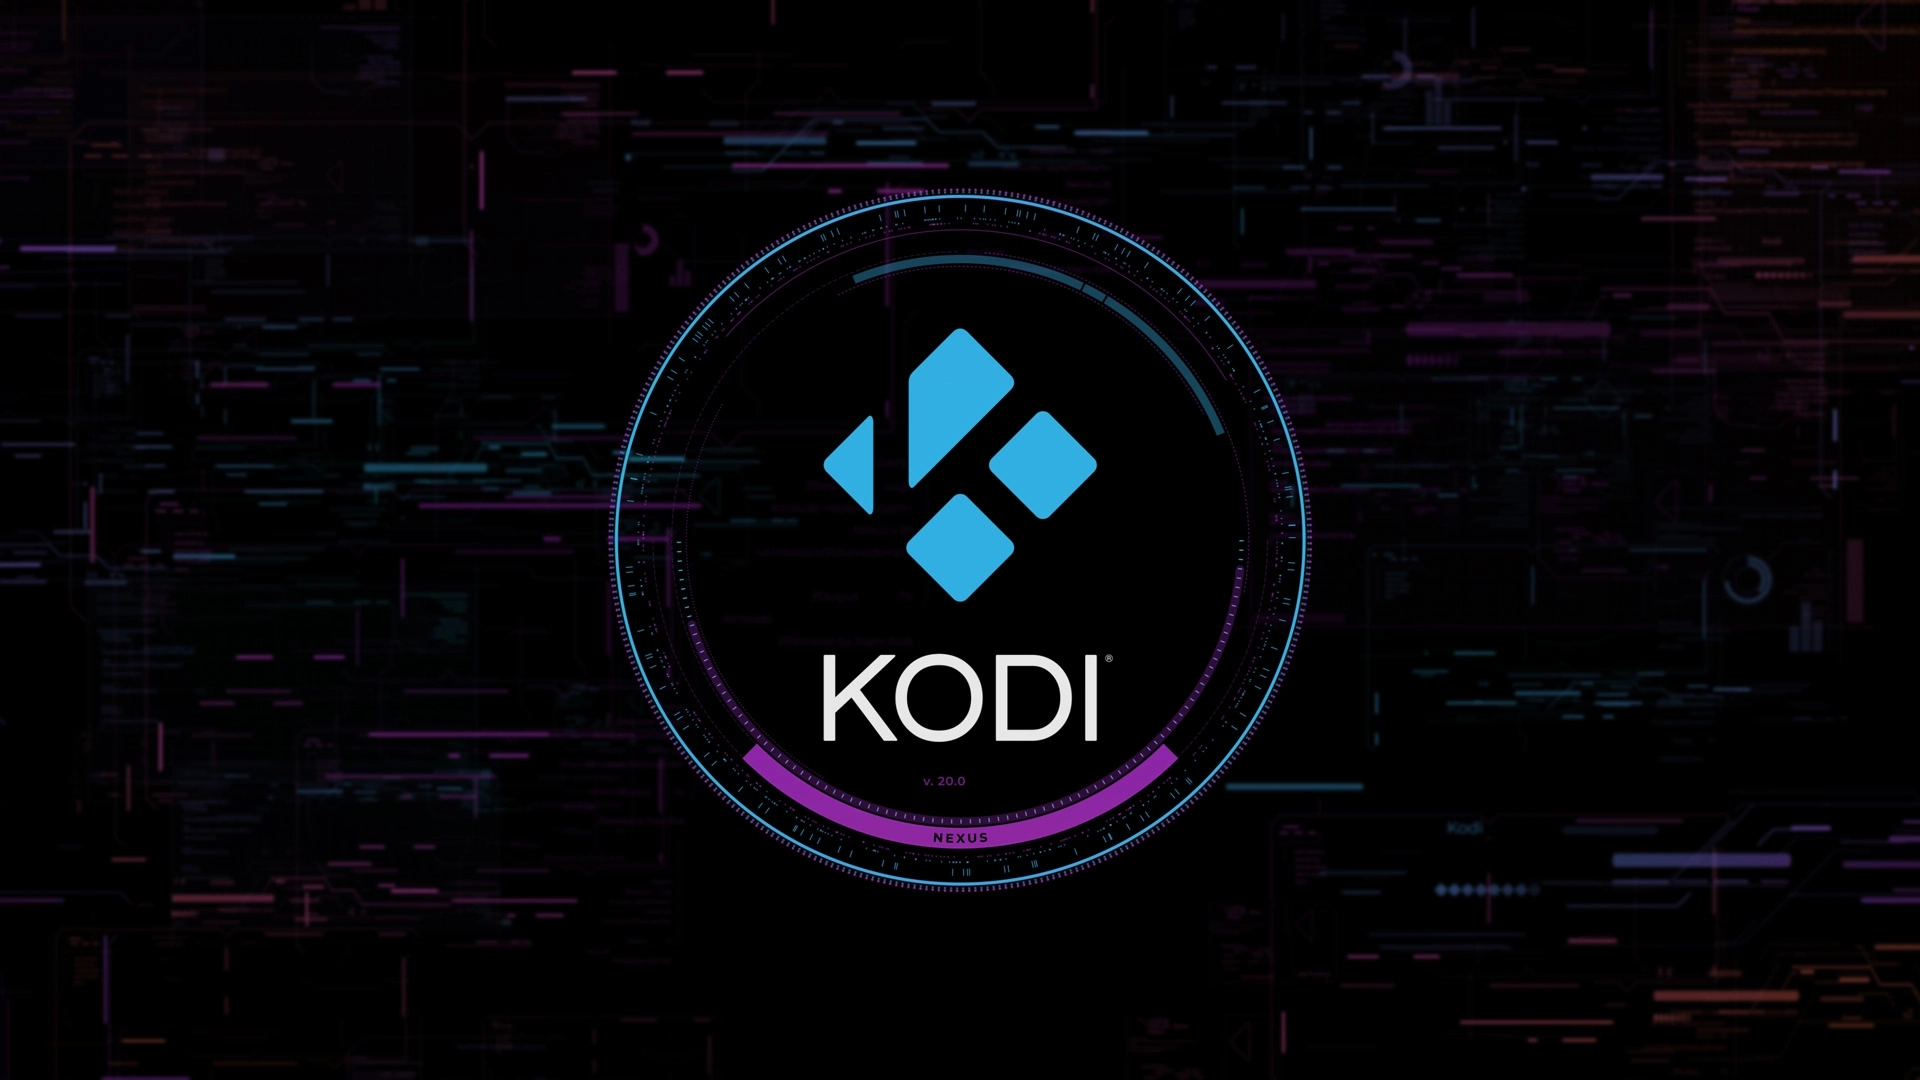 Kodi 20 “Nexus” Released with AV1 Hardware Decoding on Linux, PipeWire Support